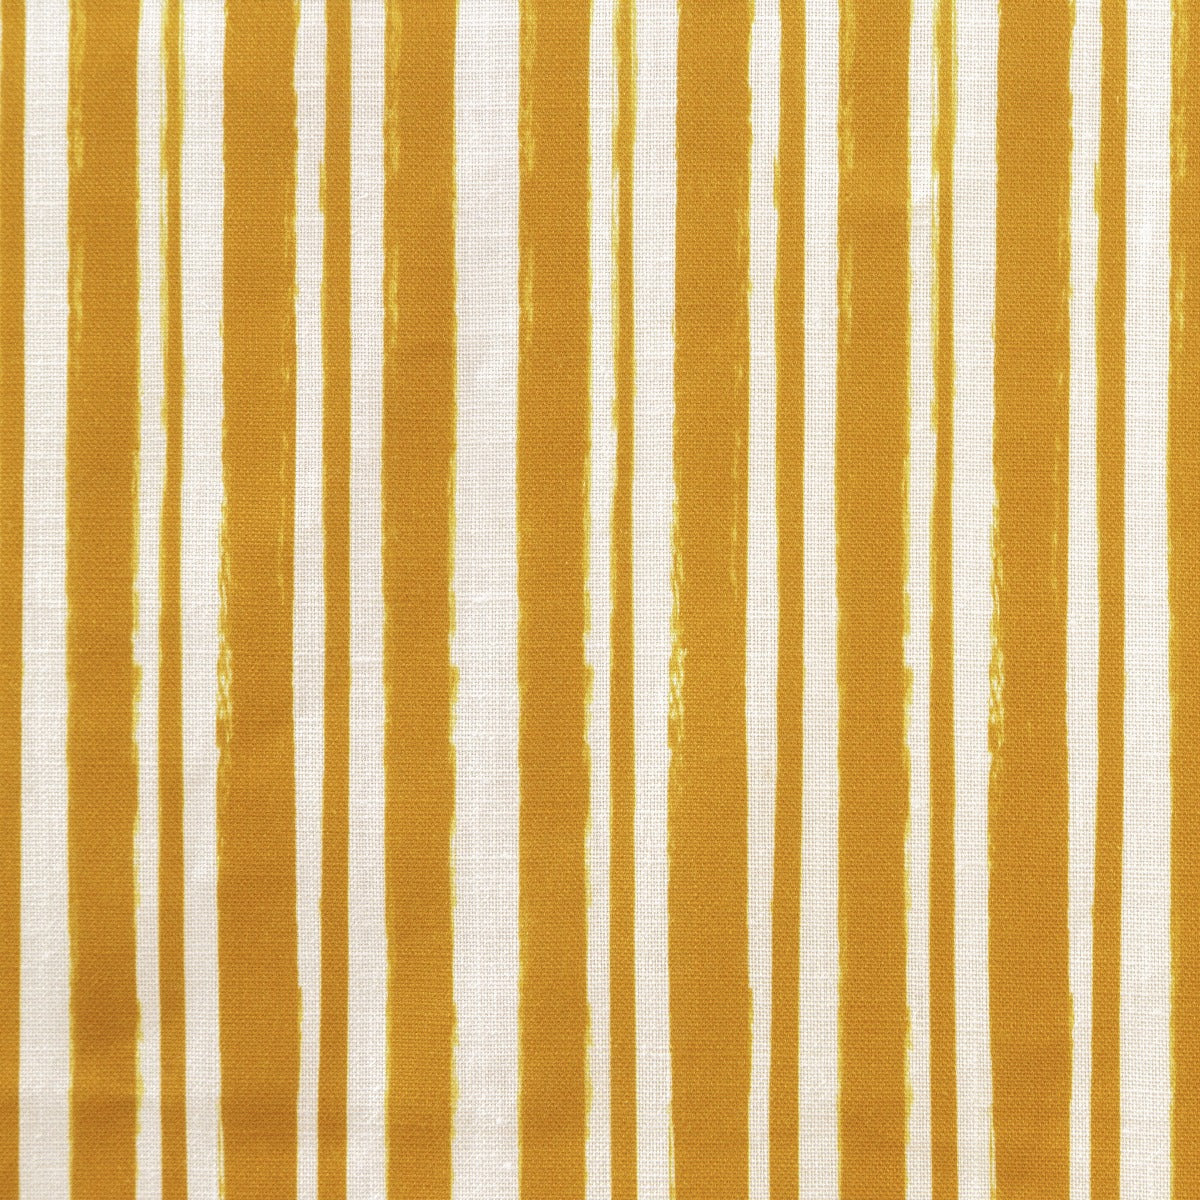 Painterly Stripe Fabric, Oyster Linen